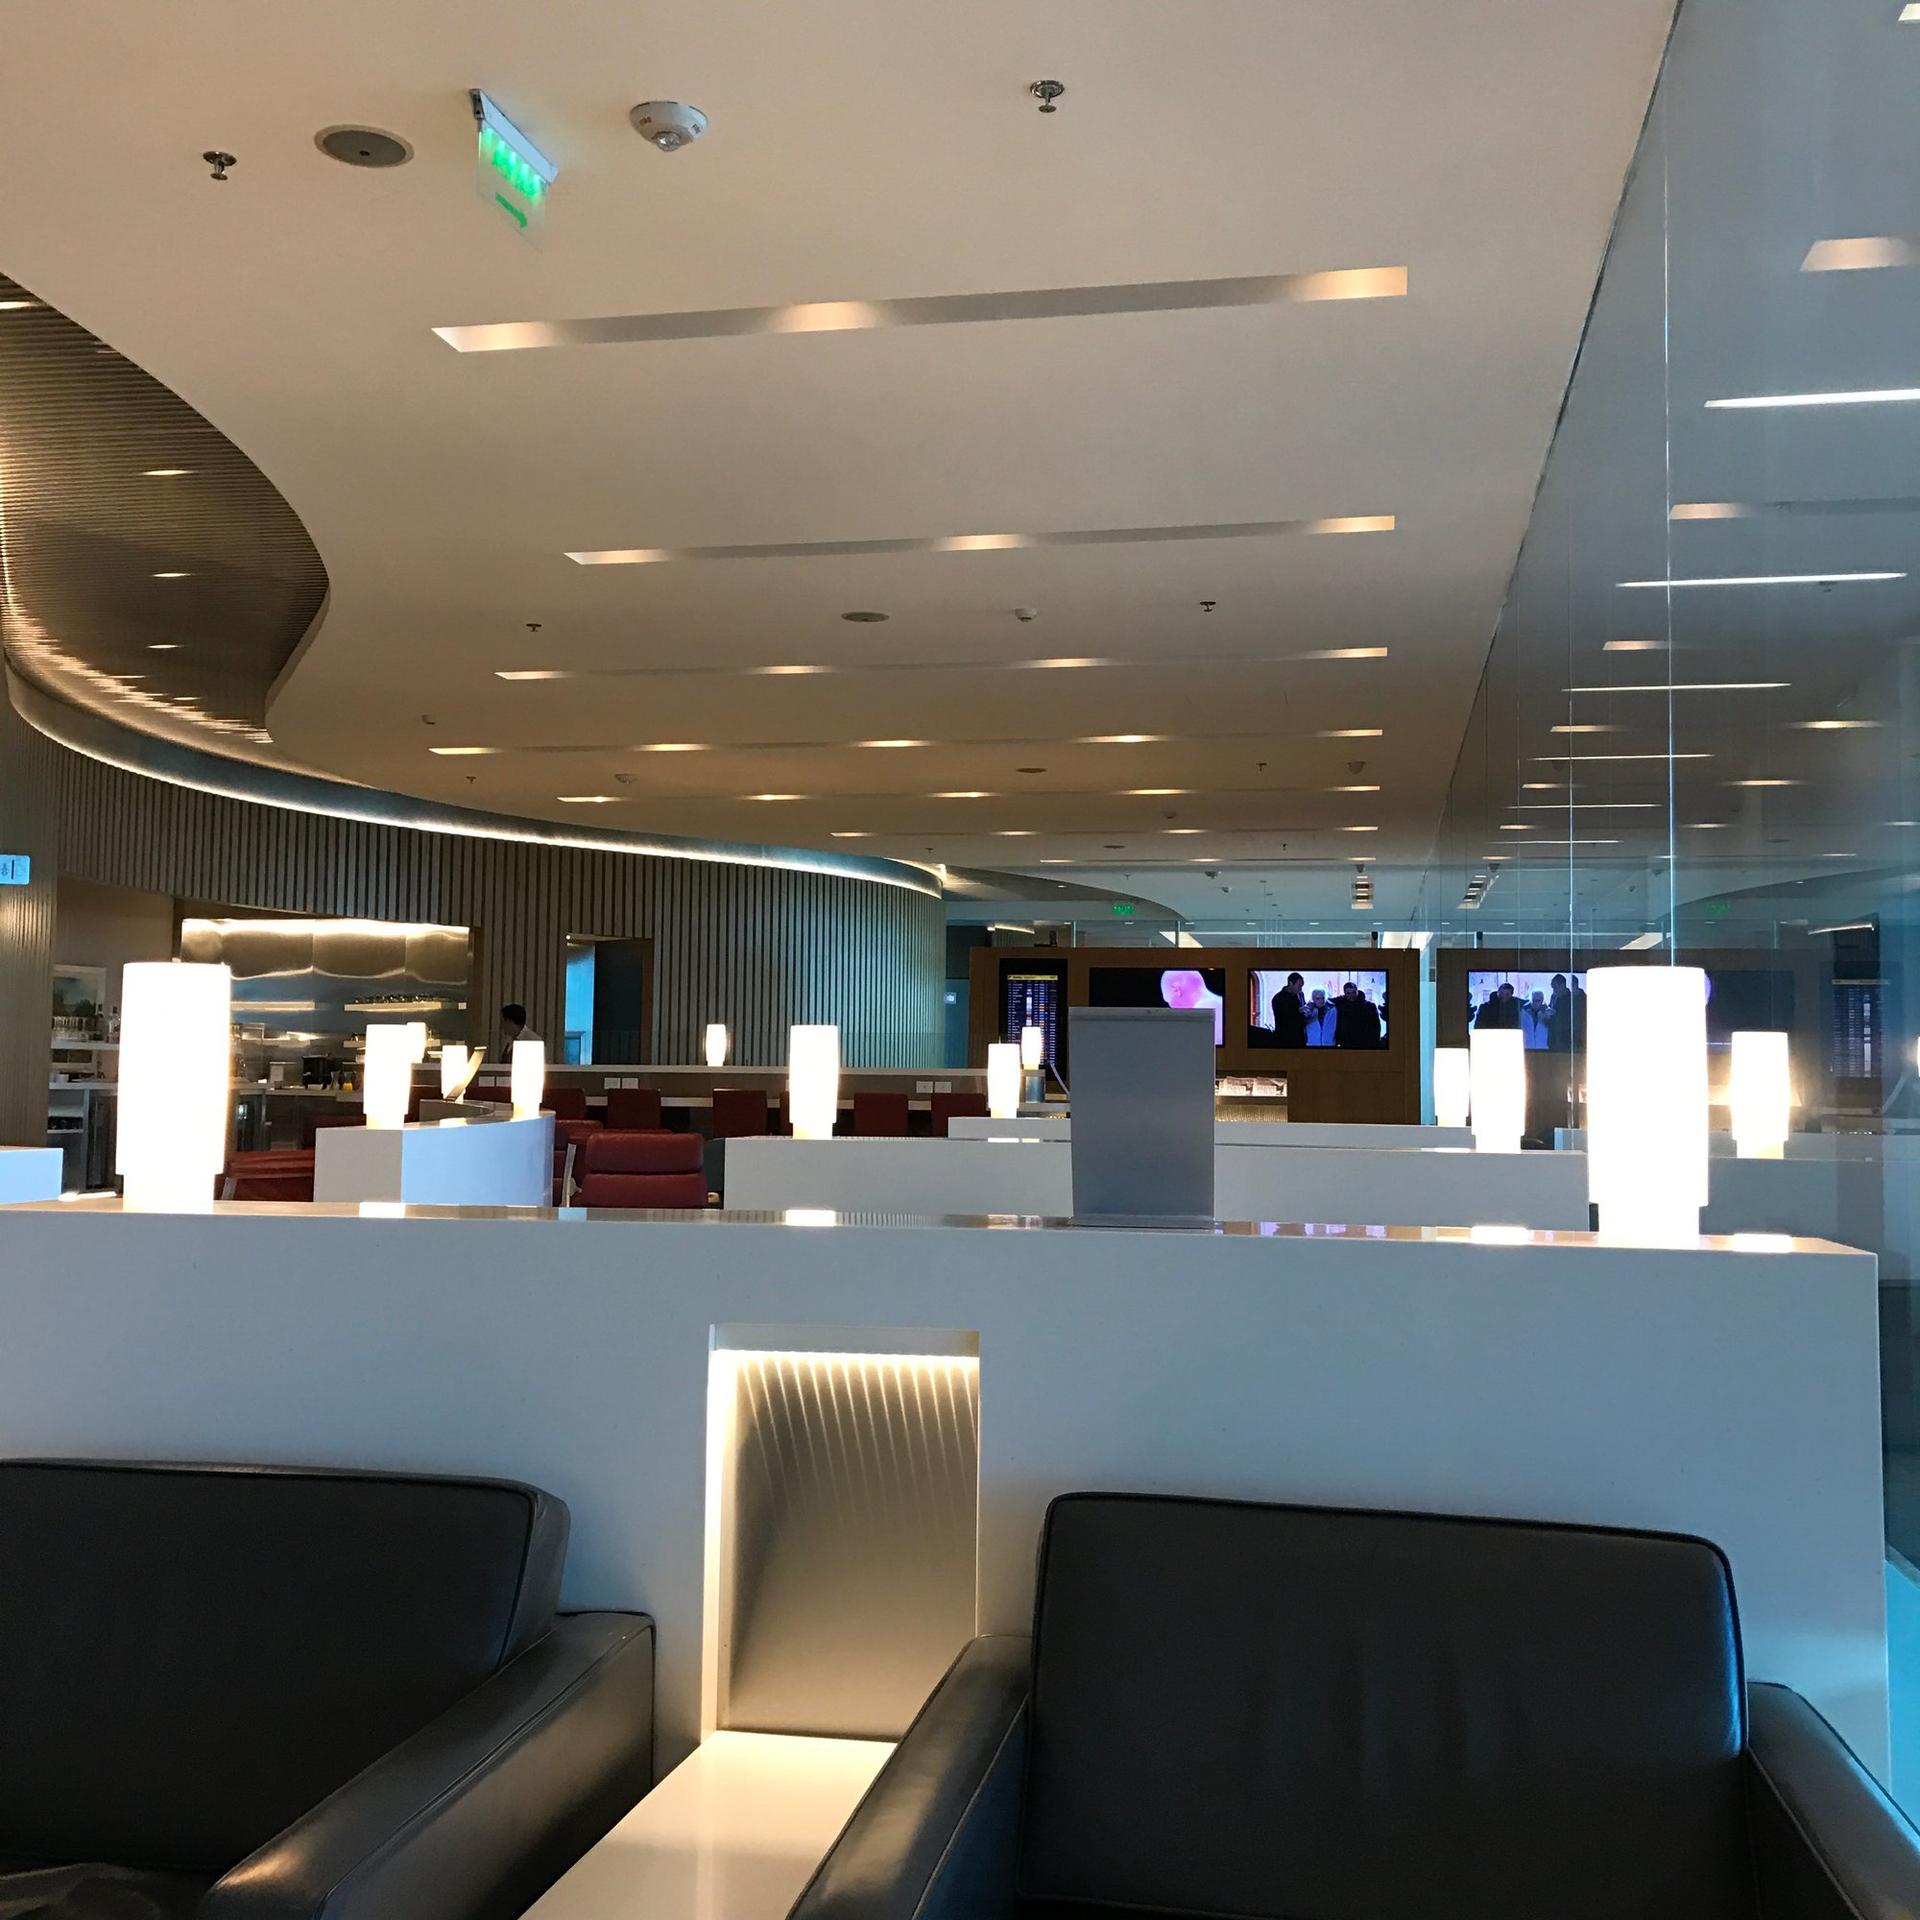 American Airlines Admirals Club & Iberia VIP Lounge image 12 of 18